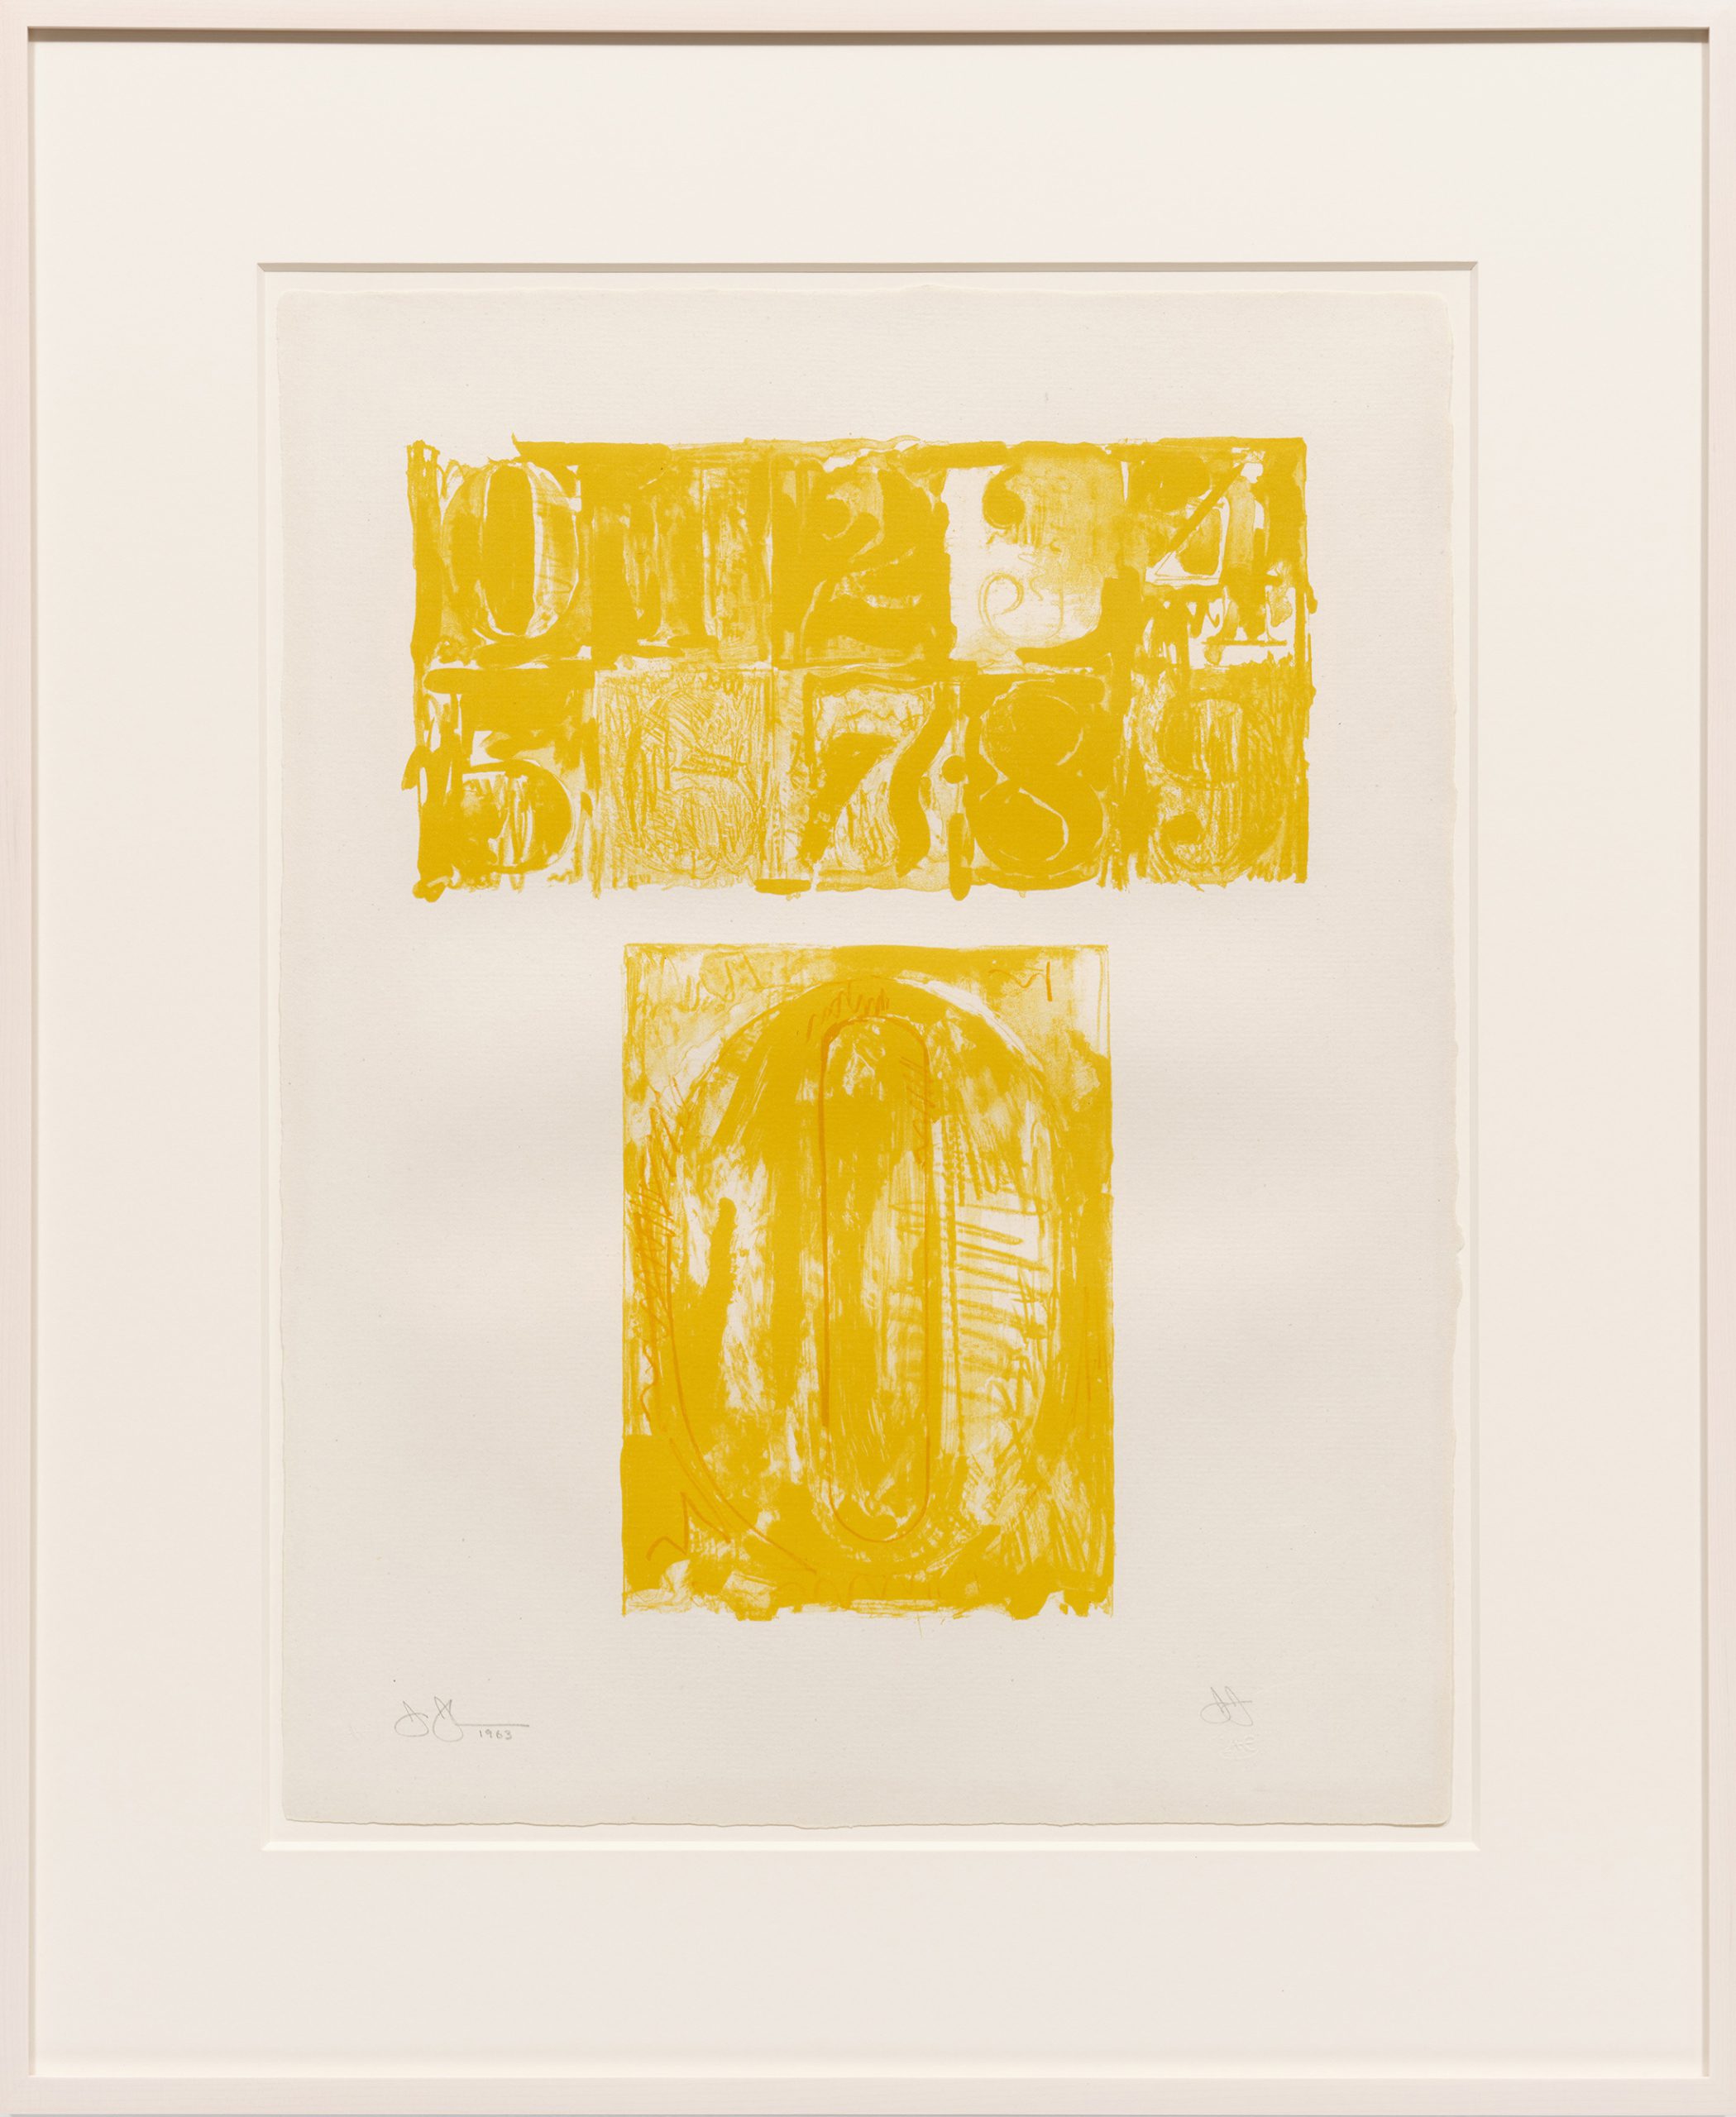 0 (from 0-9) by Jasper Johns